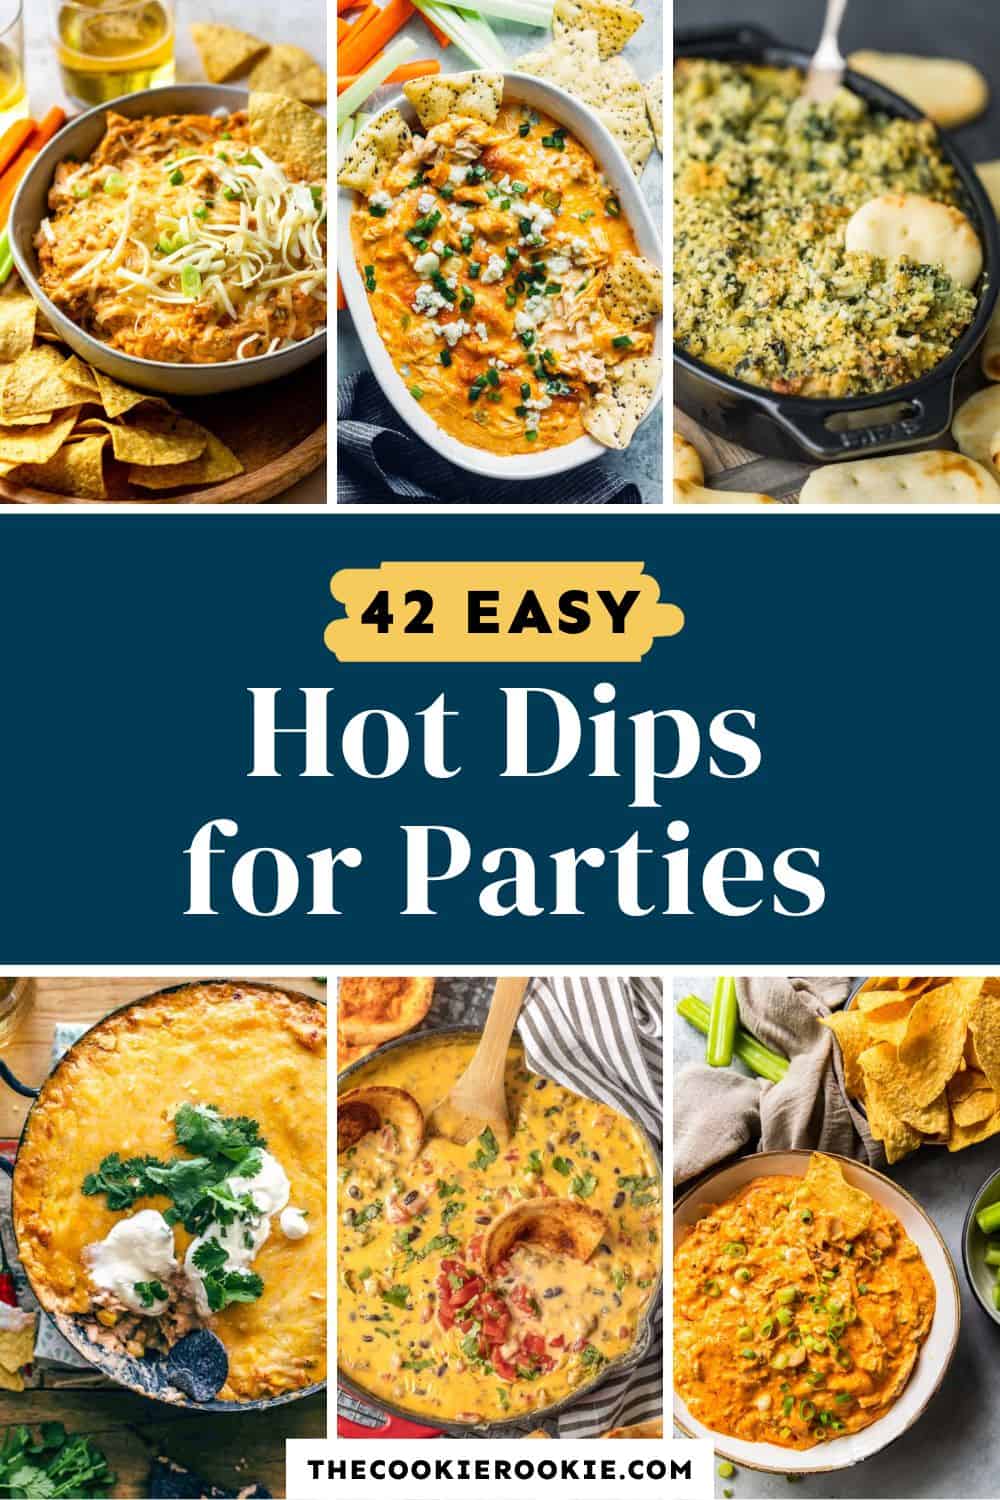 42 easy hot dips for parties Pinterest